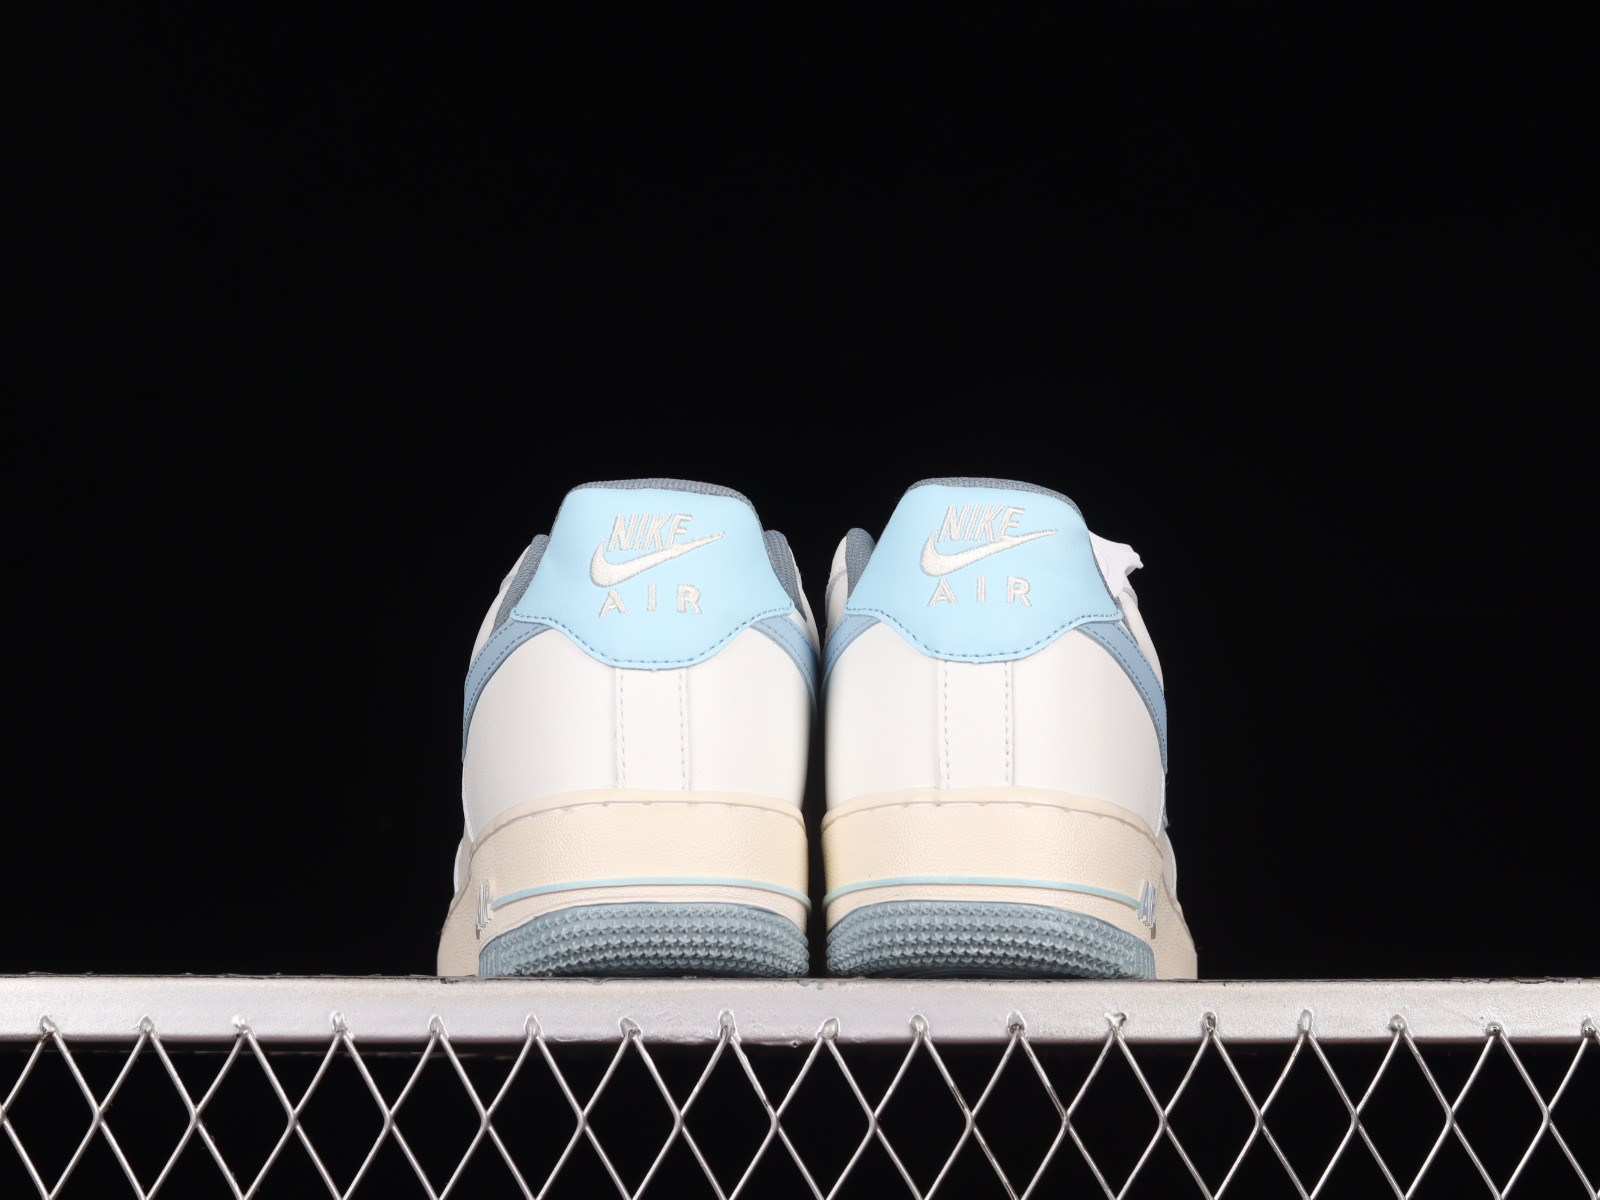 Special NBA Nike Air Force 1 Dropping - GmarShops - Nike Air Force